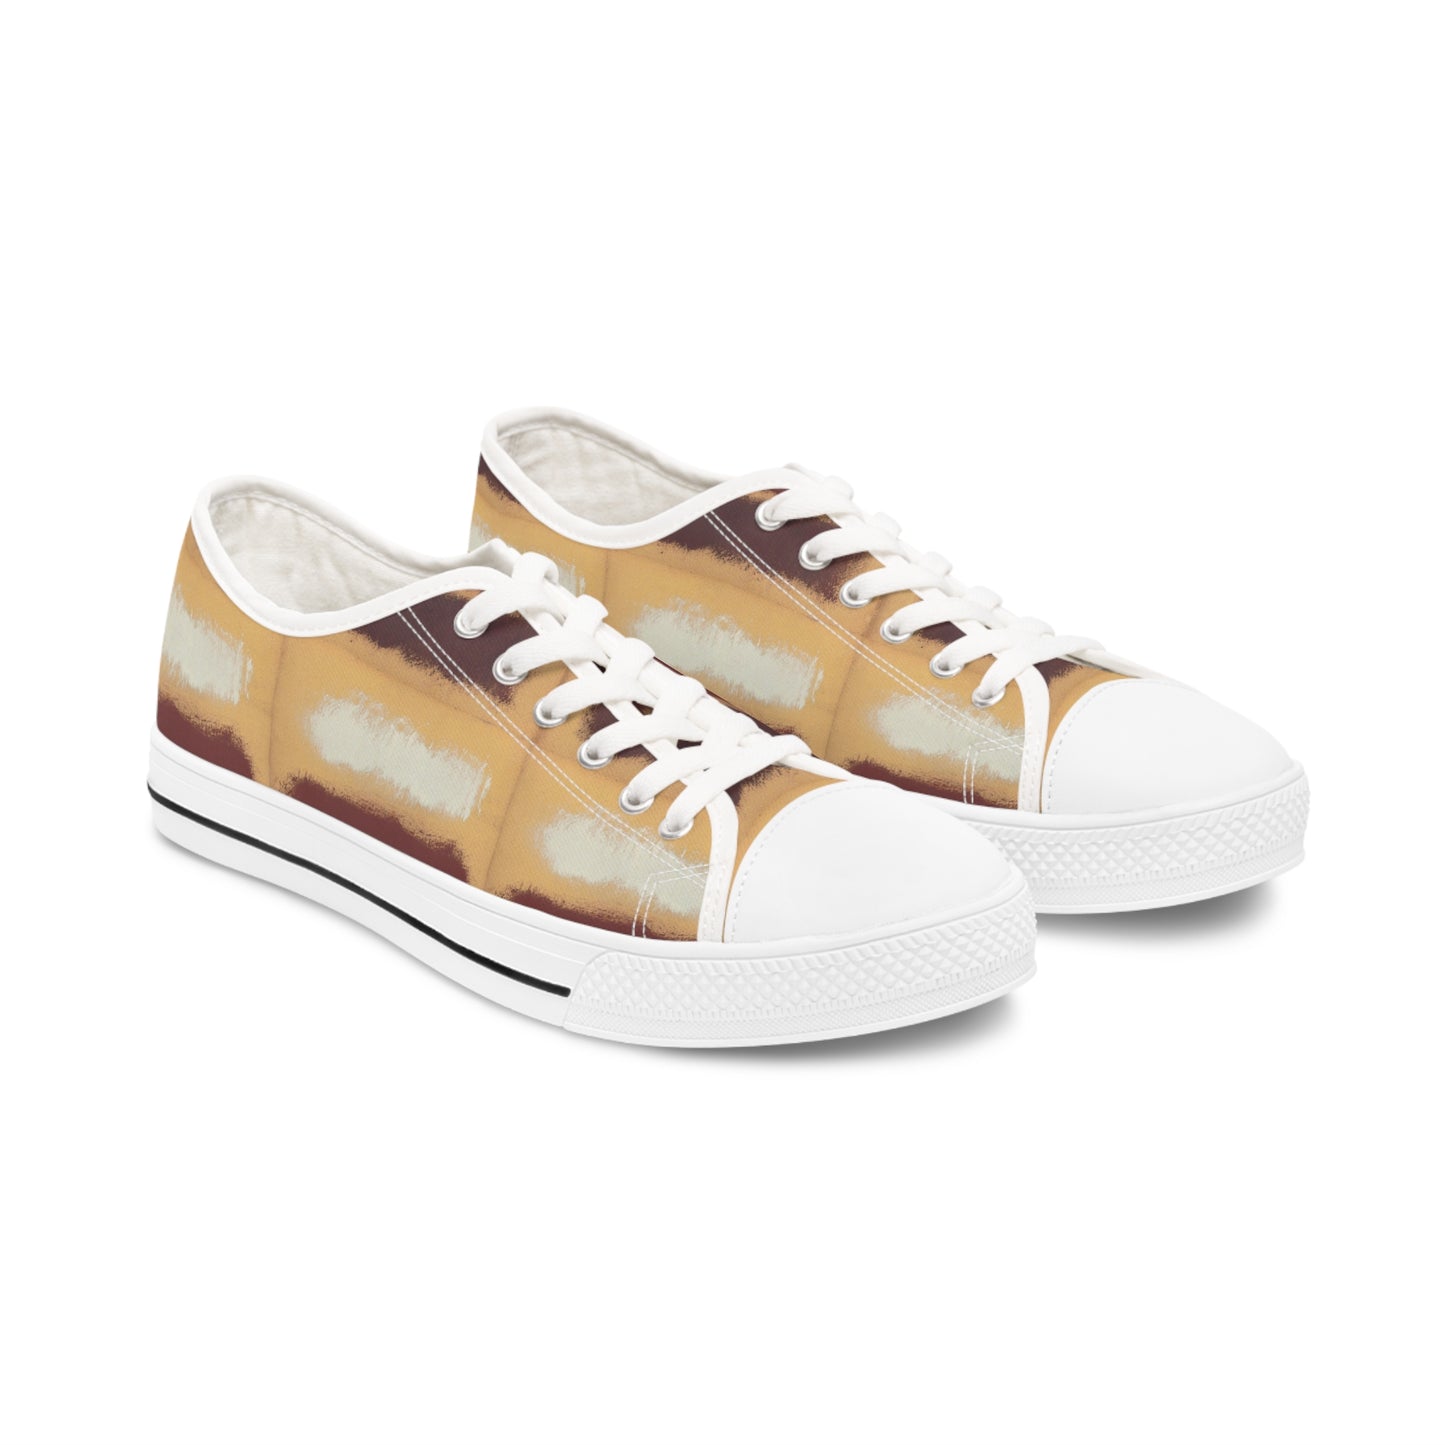 MARK ROTHKO - ABSTRACT - LOW TOP ART SNEAKERS FOR HER